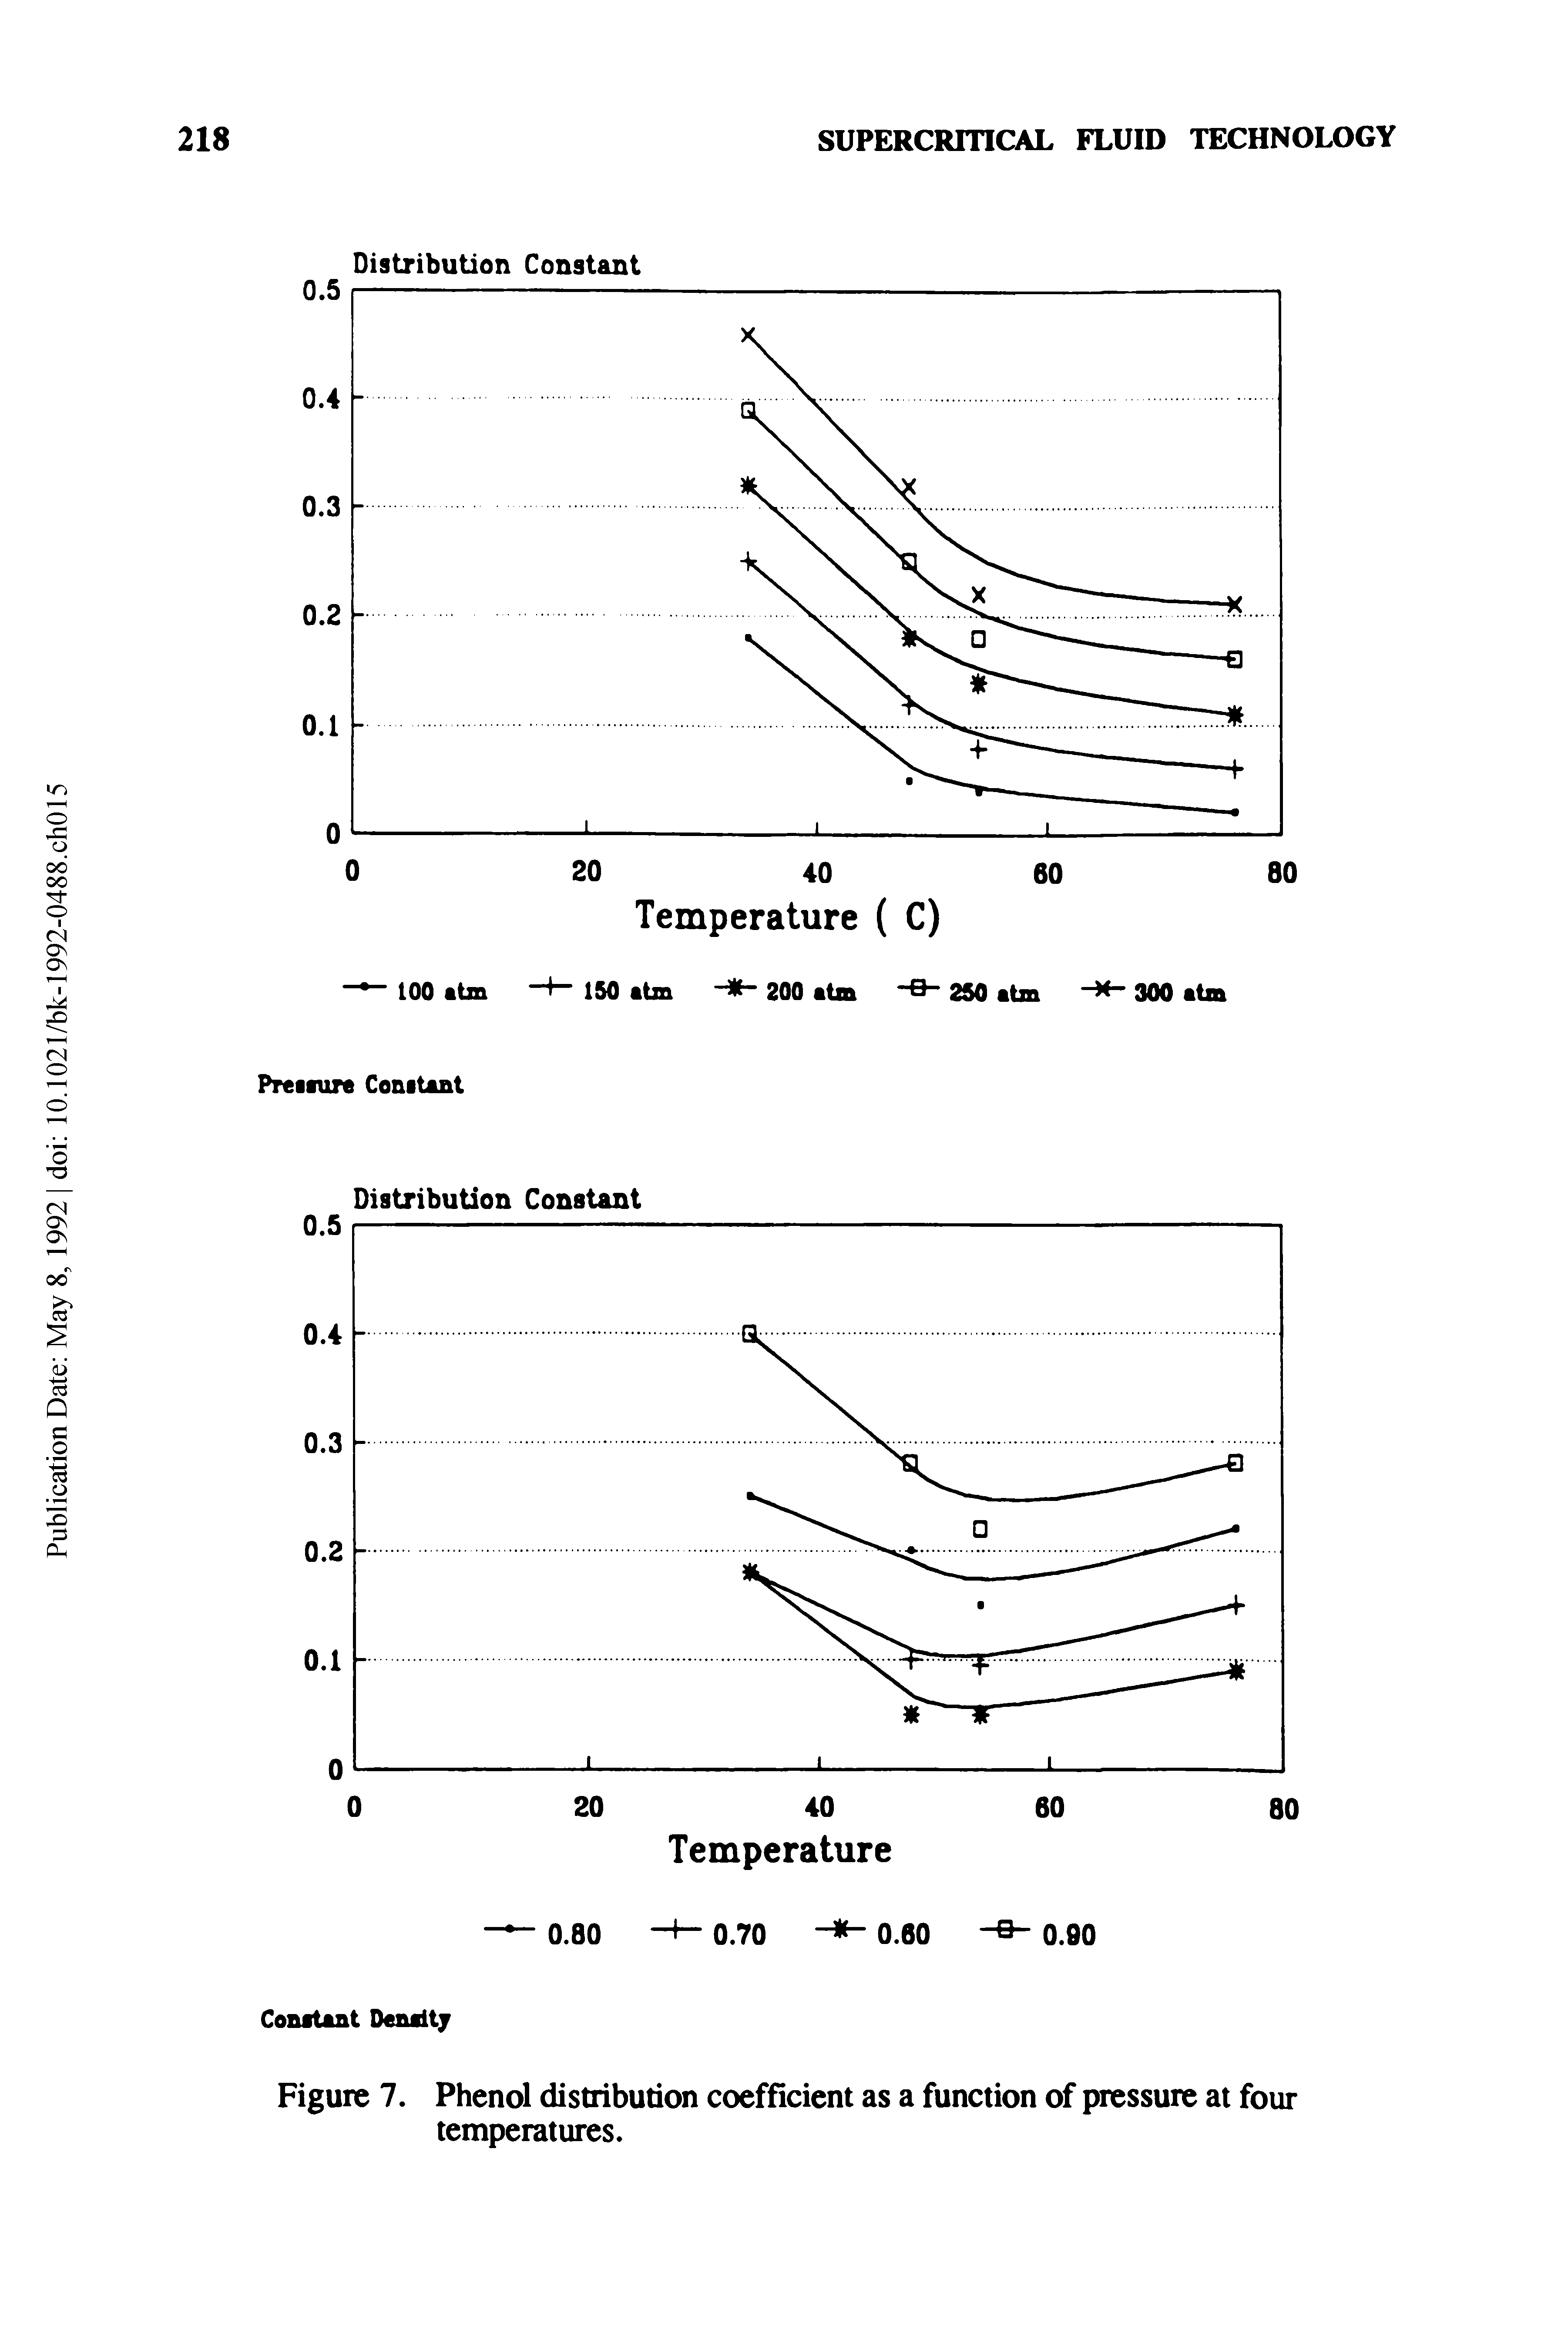 Figure 7. Phenol distribution coefficient as a function of pressure at four temperatures.